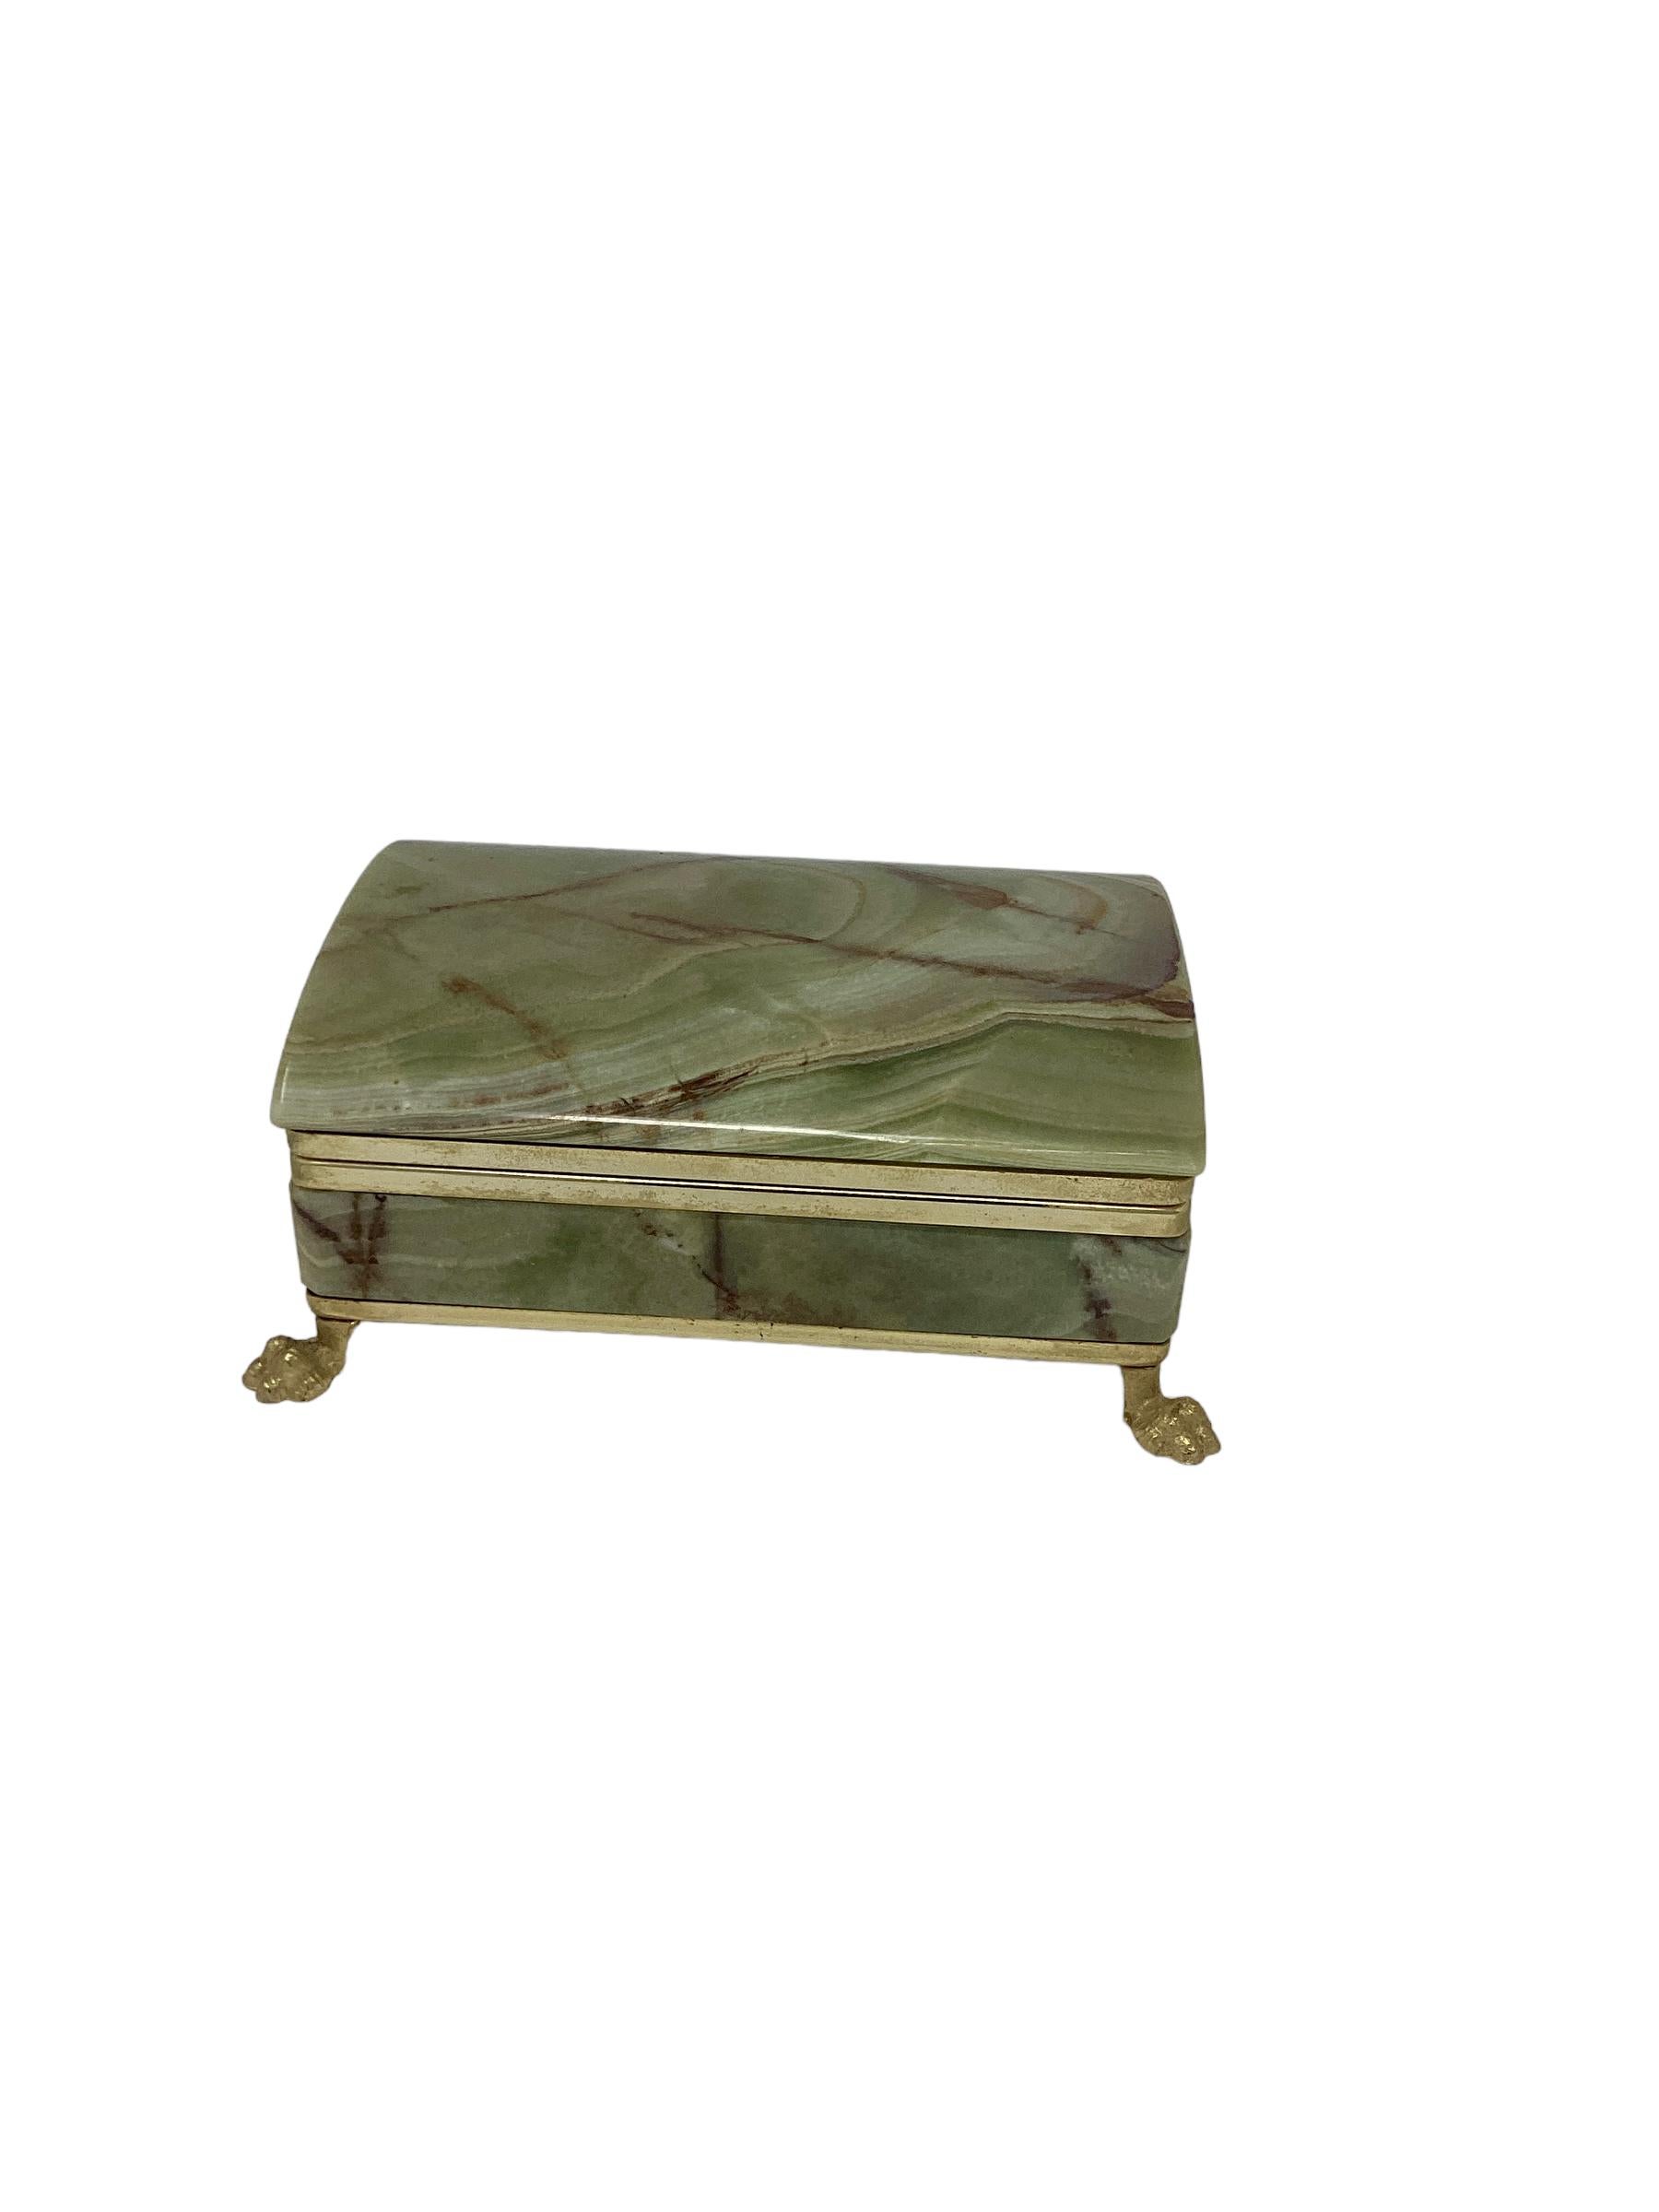 Italian Bronze Mounted Dome Top Green Onyx Box with Paw Feet  For Sale